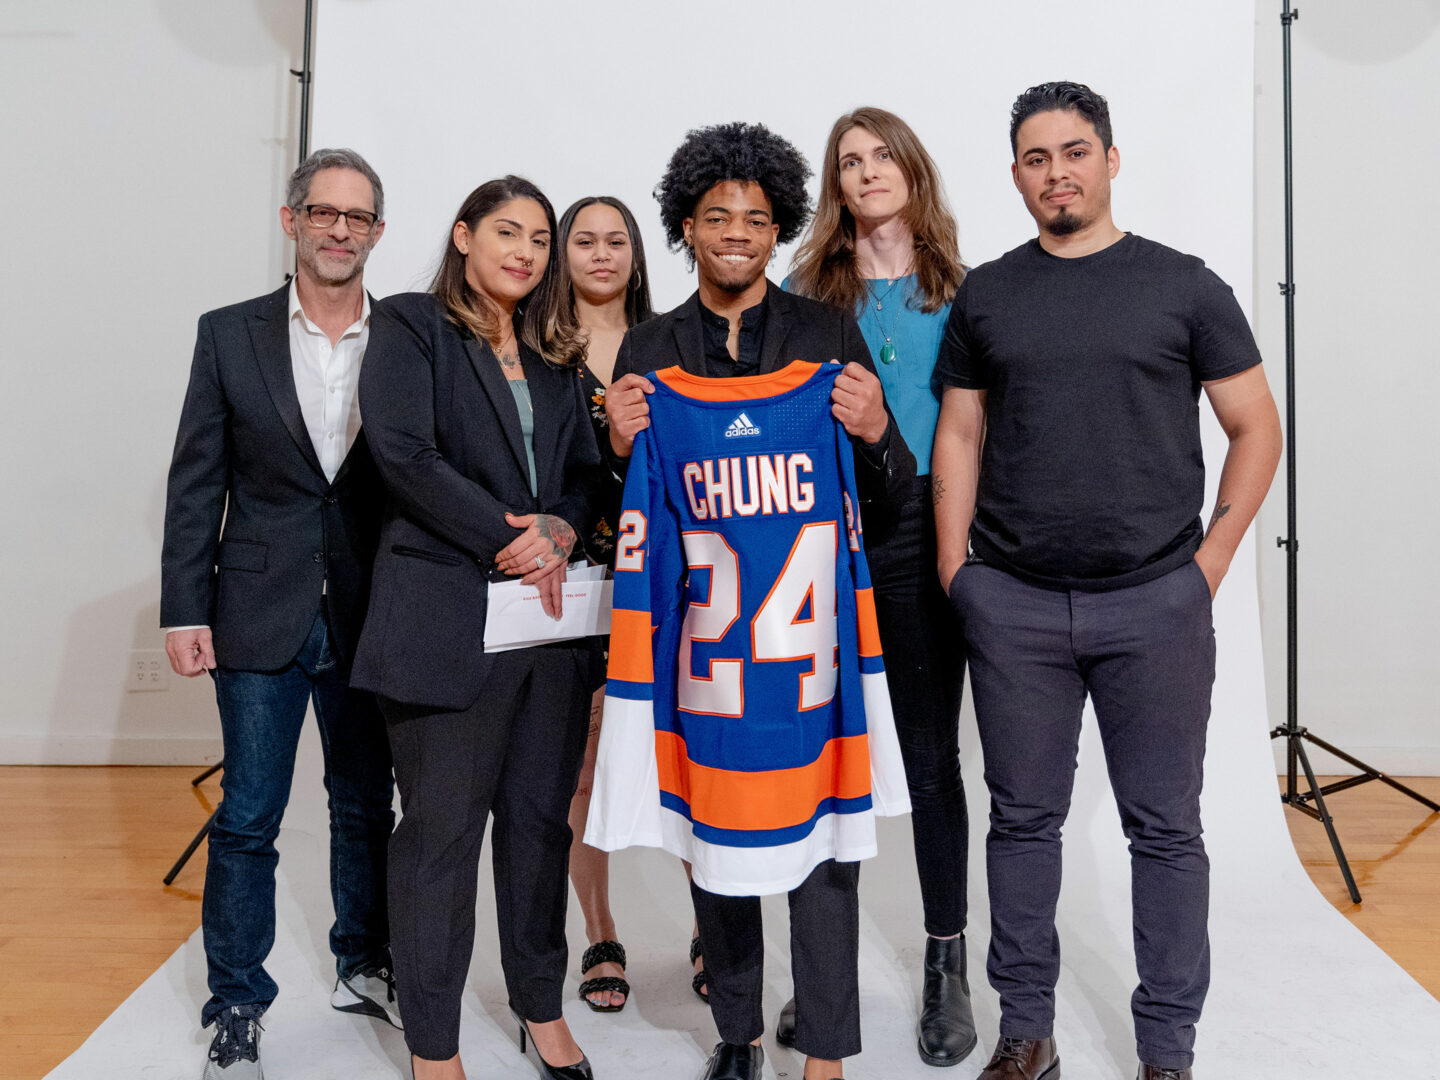 Hew poses with a group of mentors, holding a jersey with the name 